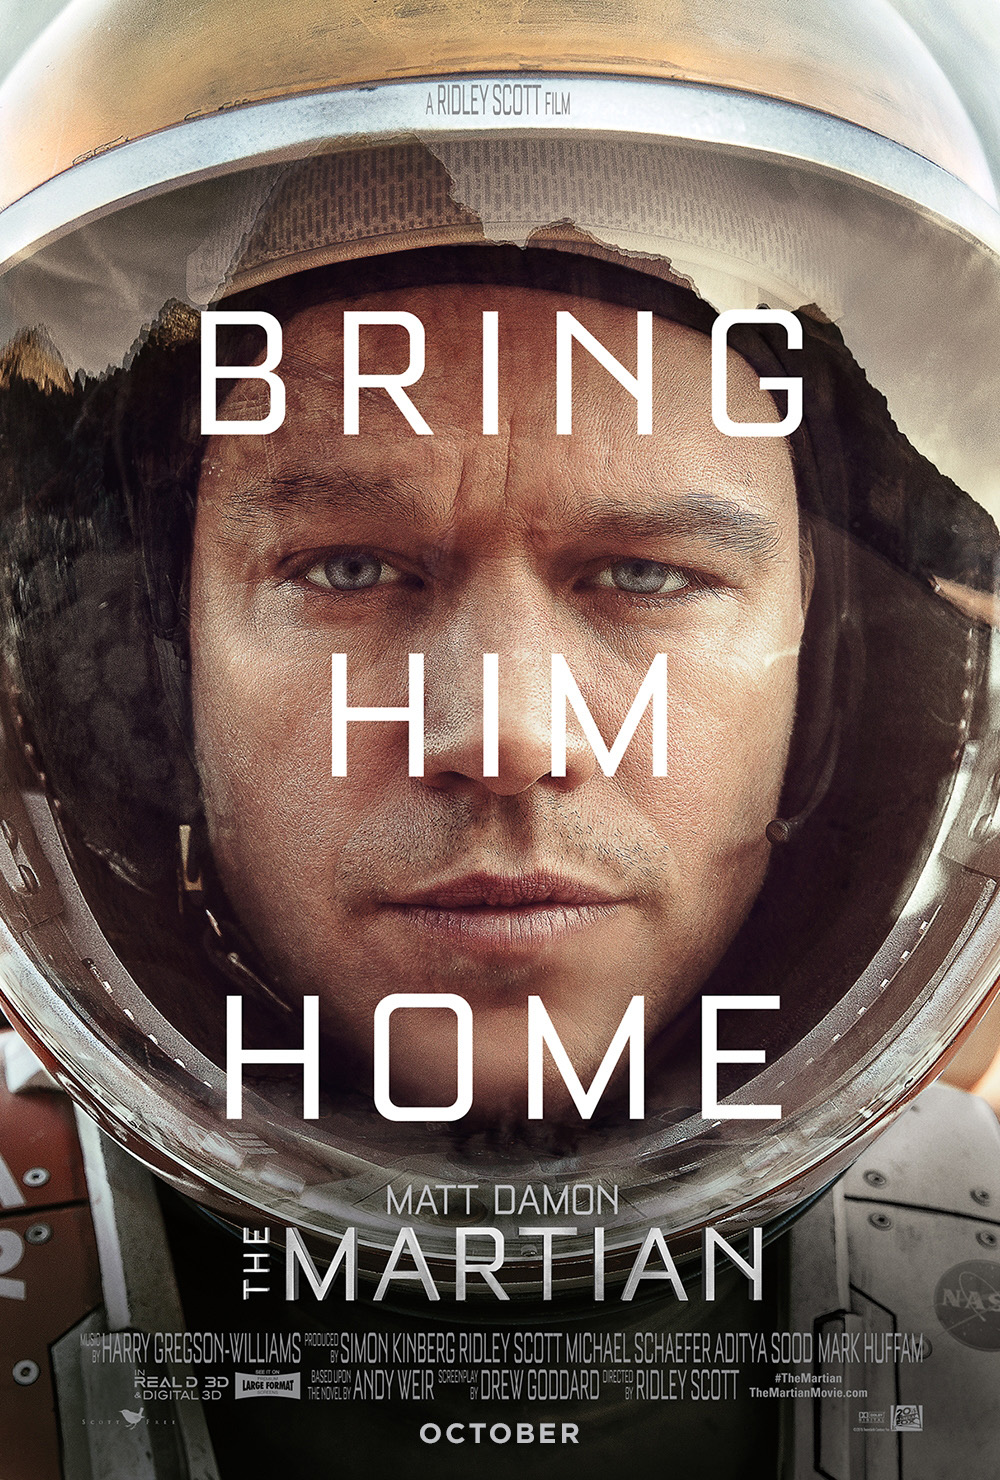 Photo: The Martian movie poster features the tag line, “bring him home,” with star Matt Damon’s face prominently displayed. Photo courtesy of 20th Century Fox.